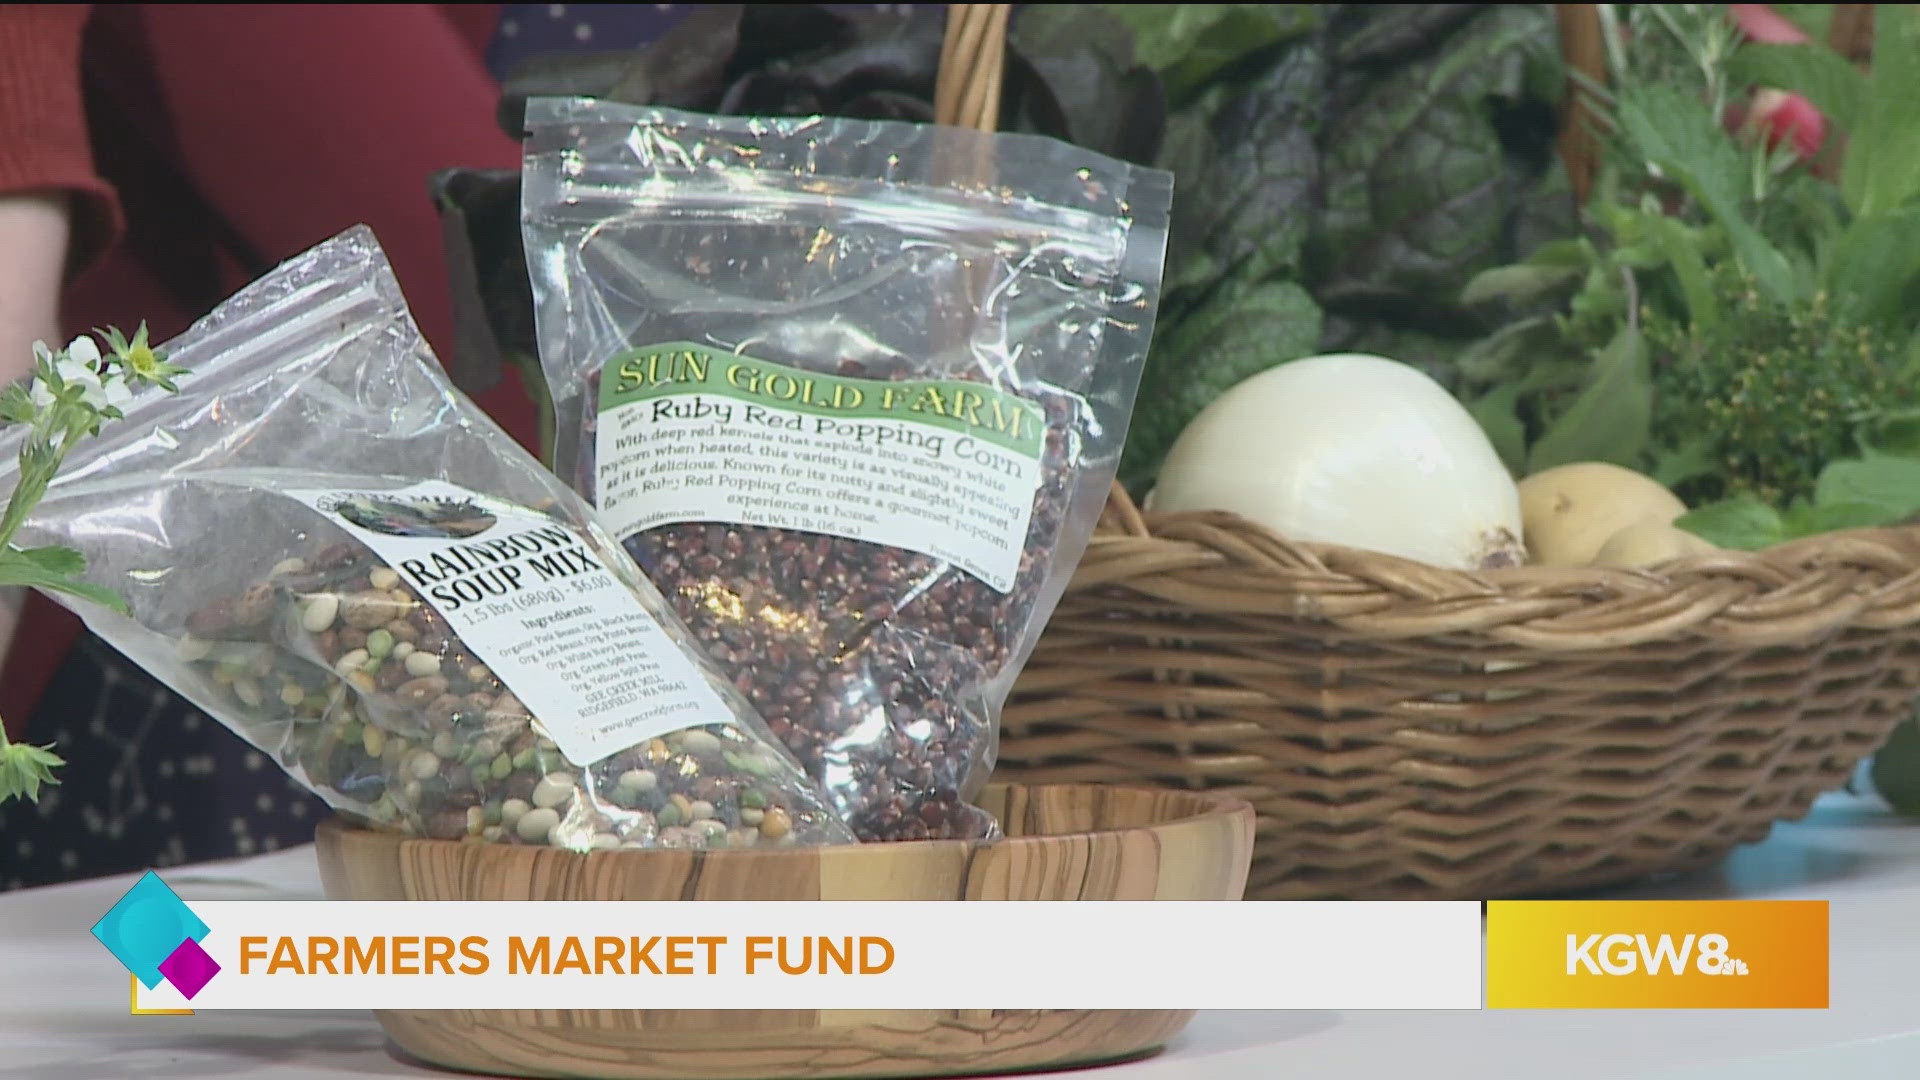 The main program at Farmers Market Fund is called Double Up Food Bucks